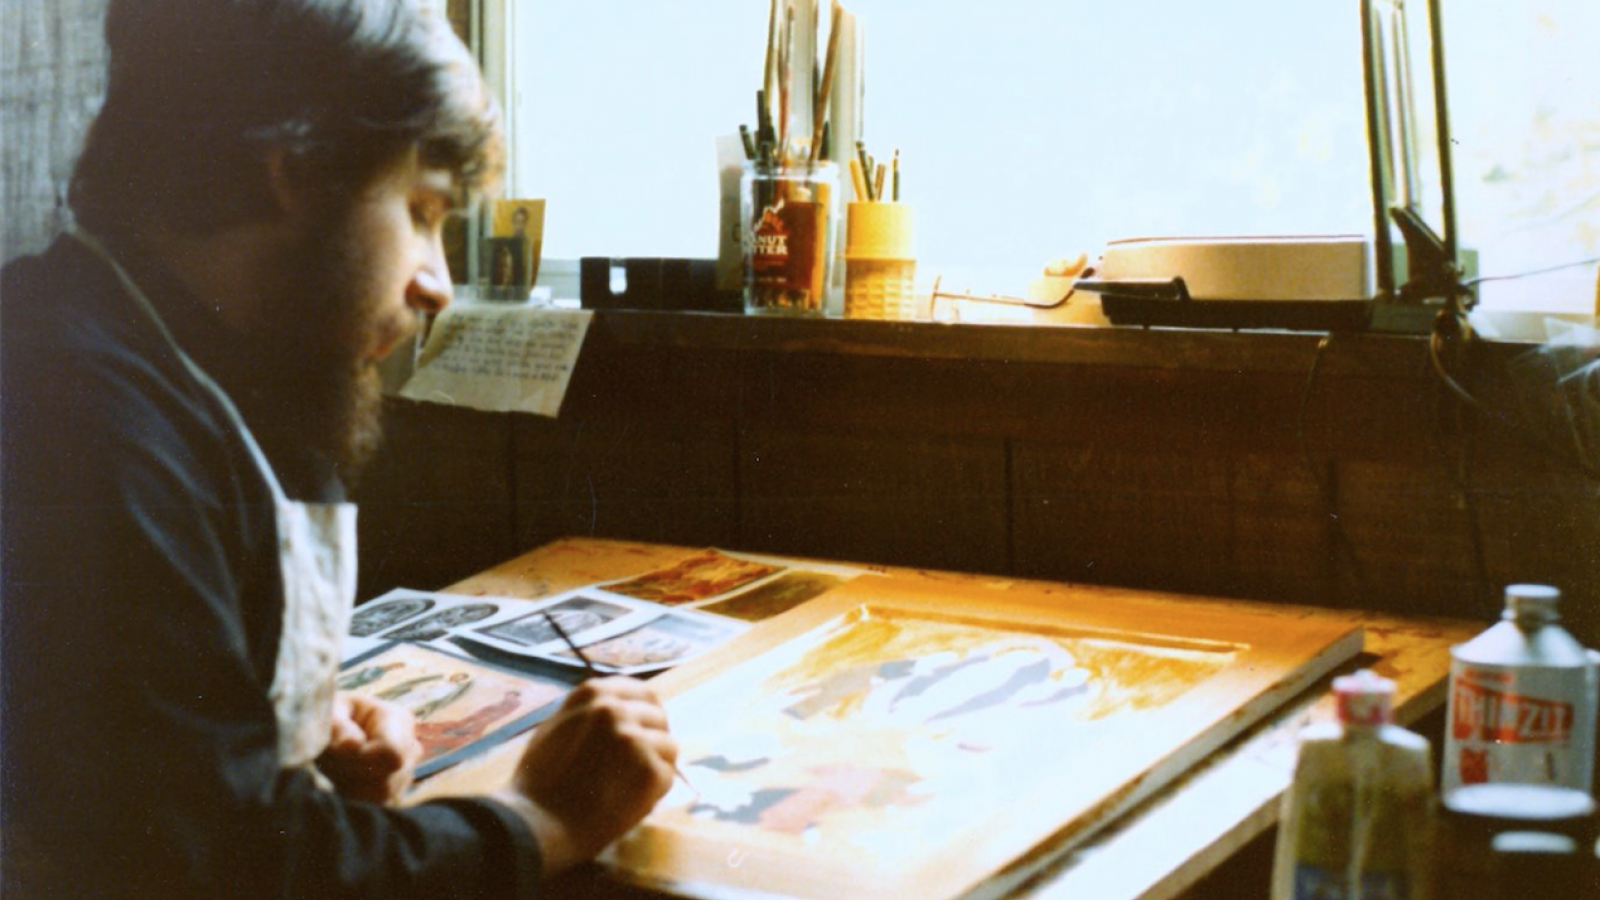 Fr. Theodore painting an icon, Cleveland, 1979.